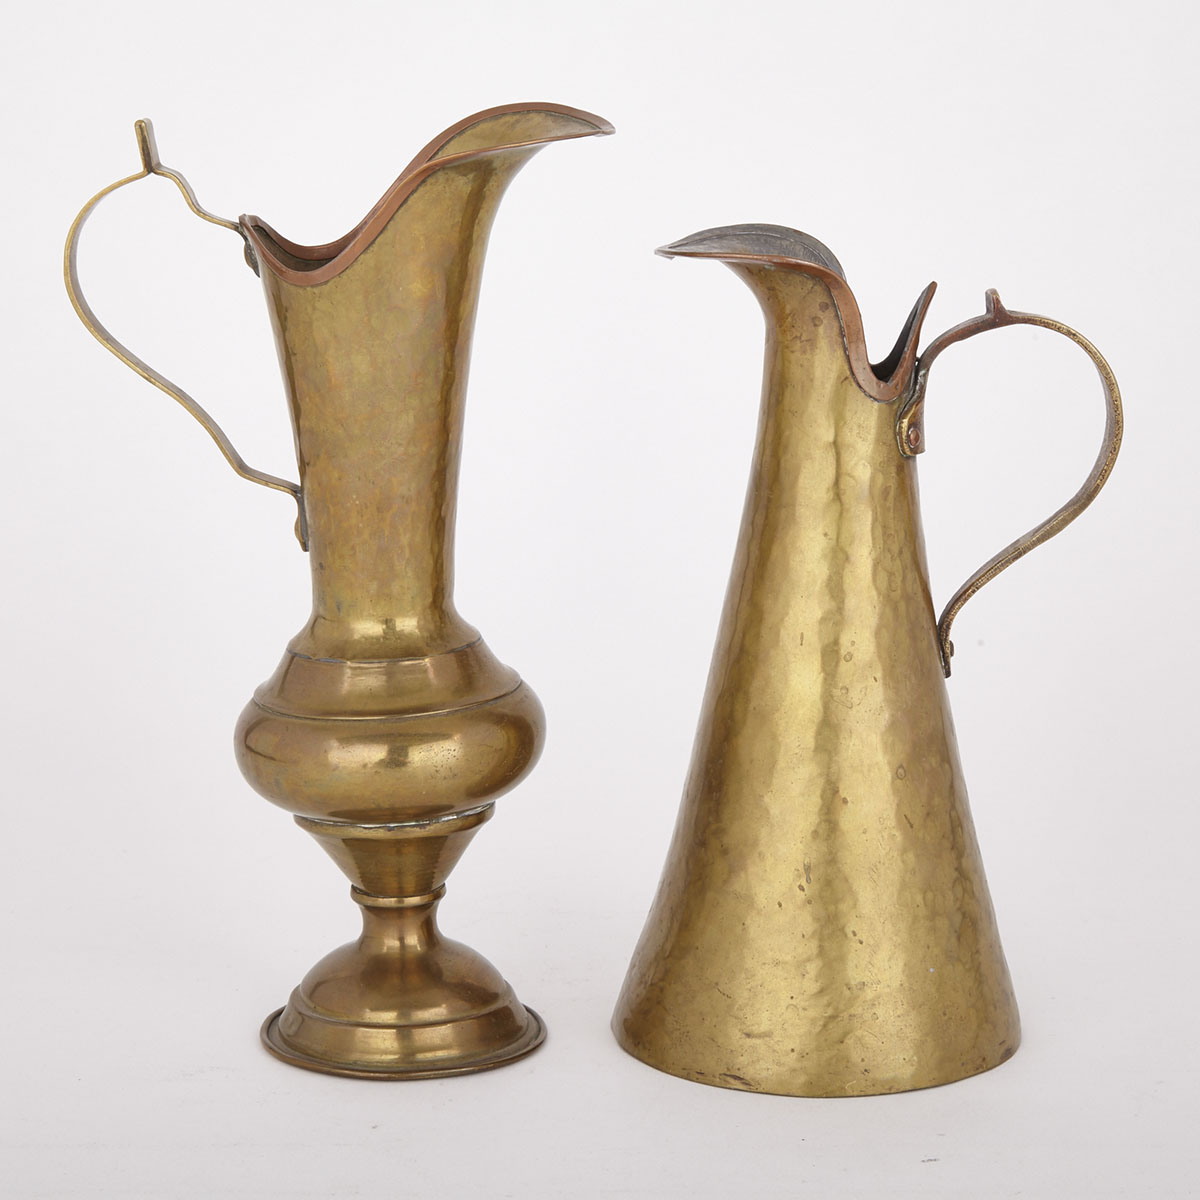 Two Russian Copper Mounted Hammered Brass Ewers, 19th/early 20th century